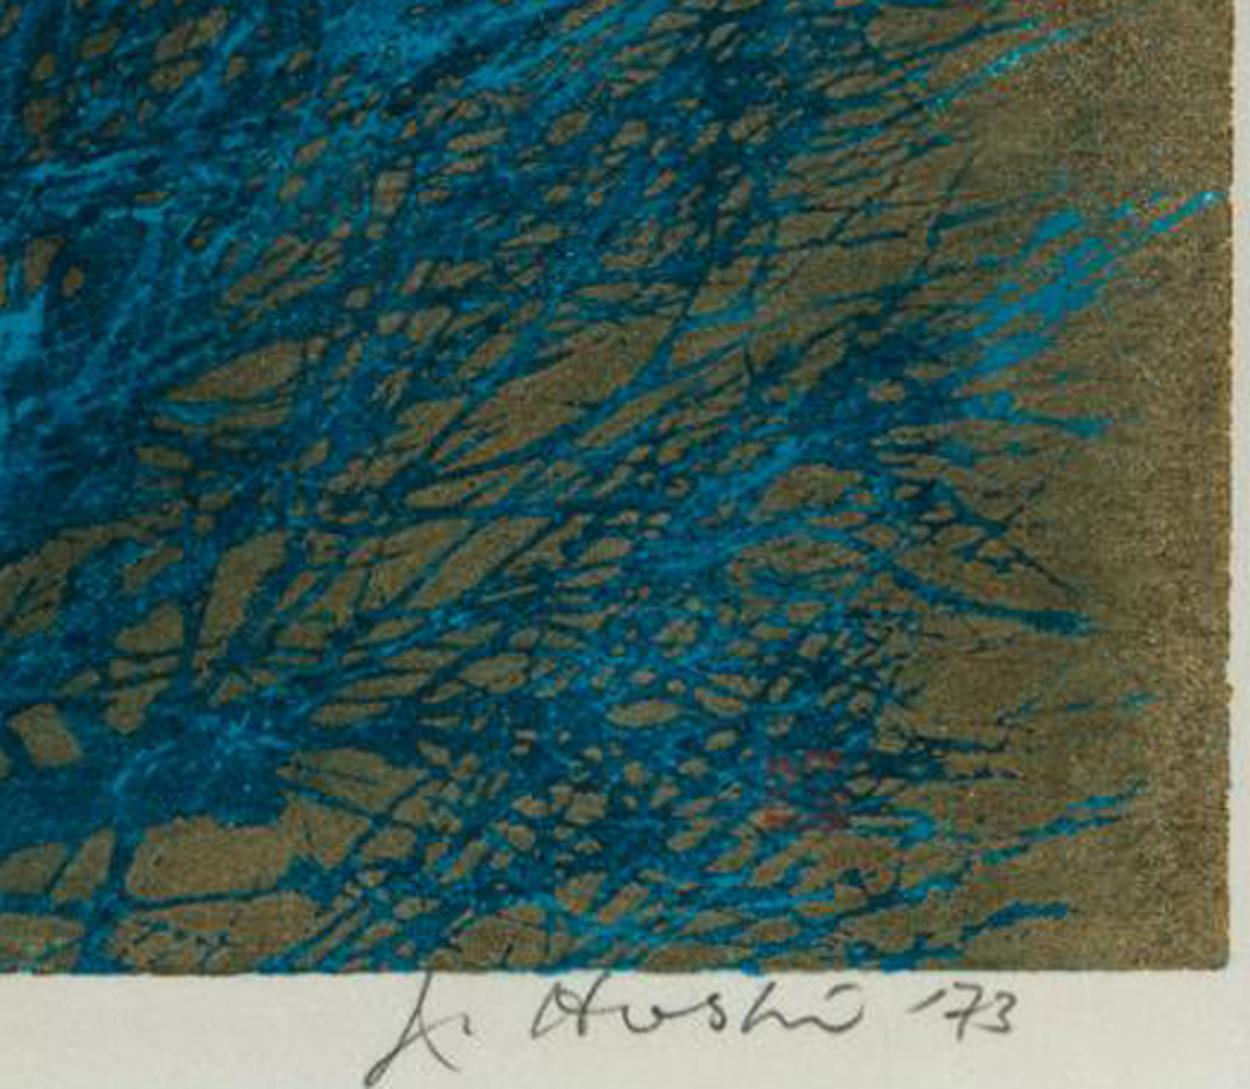 Japanese JOICHI HOSHI (1911-1979), Blue Tree, Woodblock, signed lower right, Dated 1973 For Sale